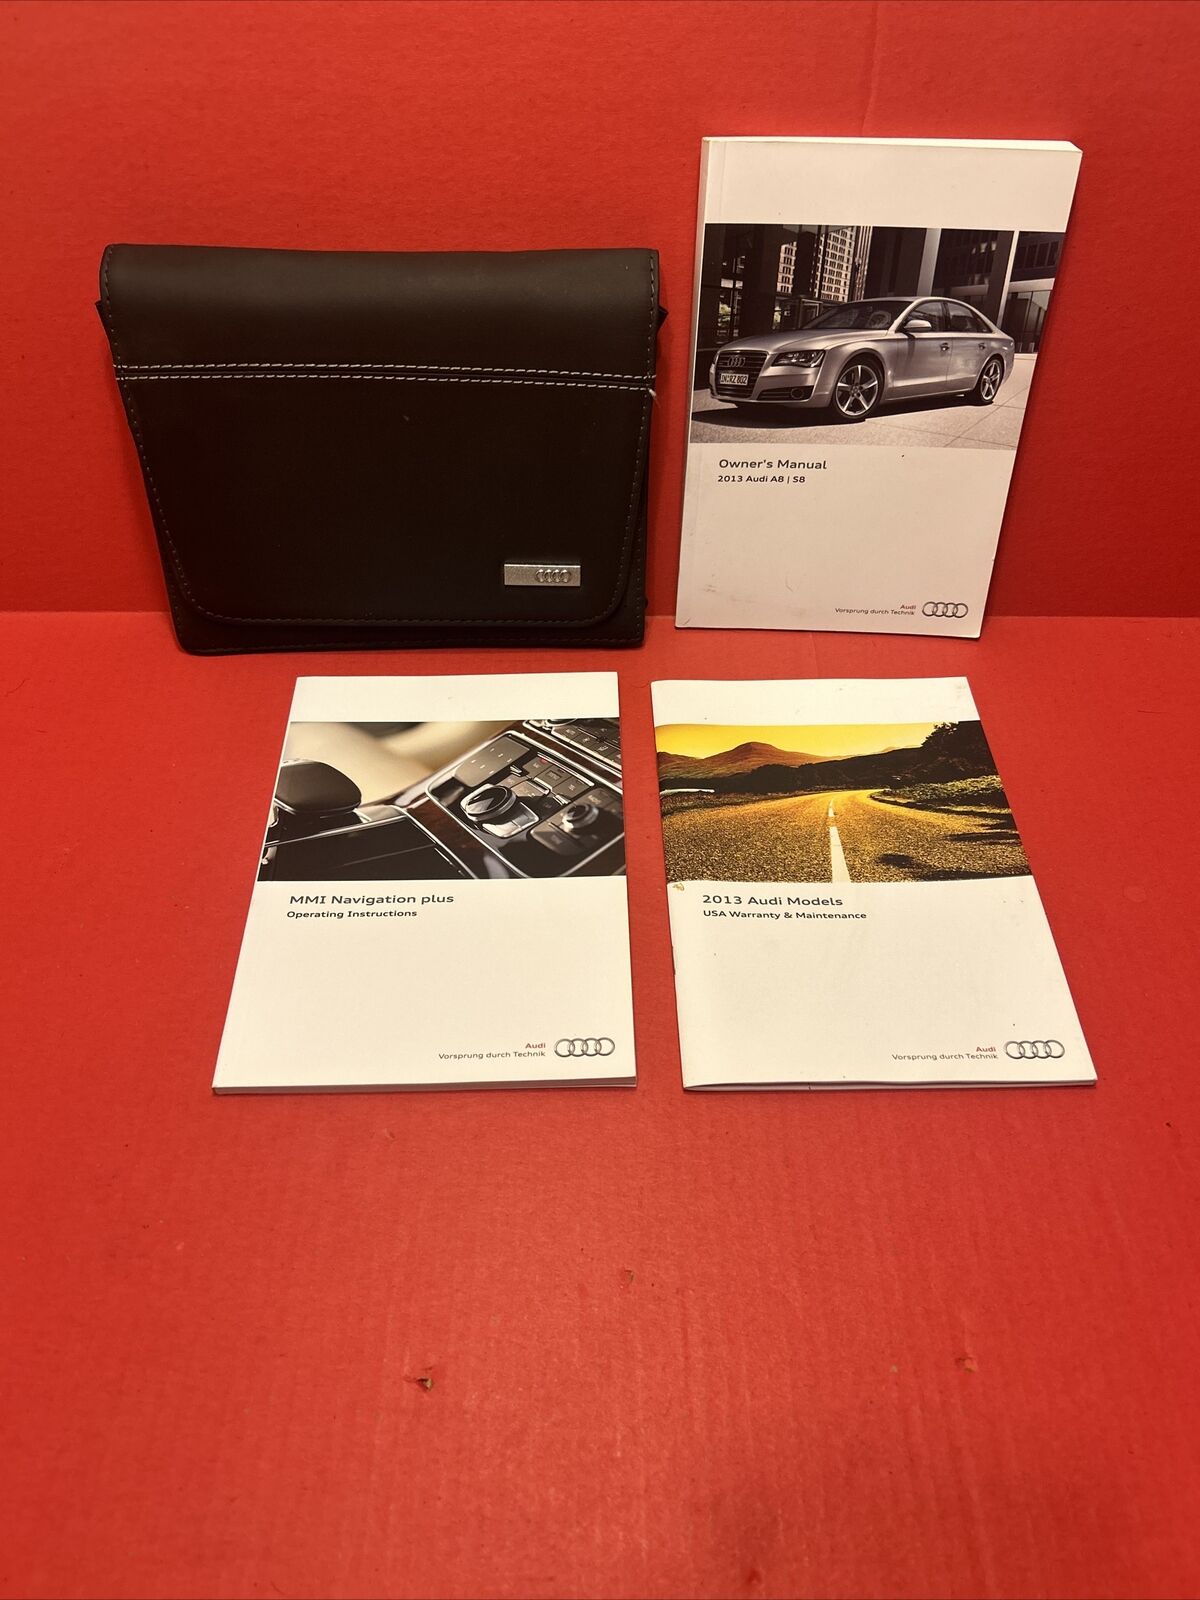 13 2013 Audi A8/S8 Owners Manual w/ Navigation and Genuine Leather Case